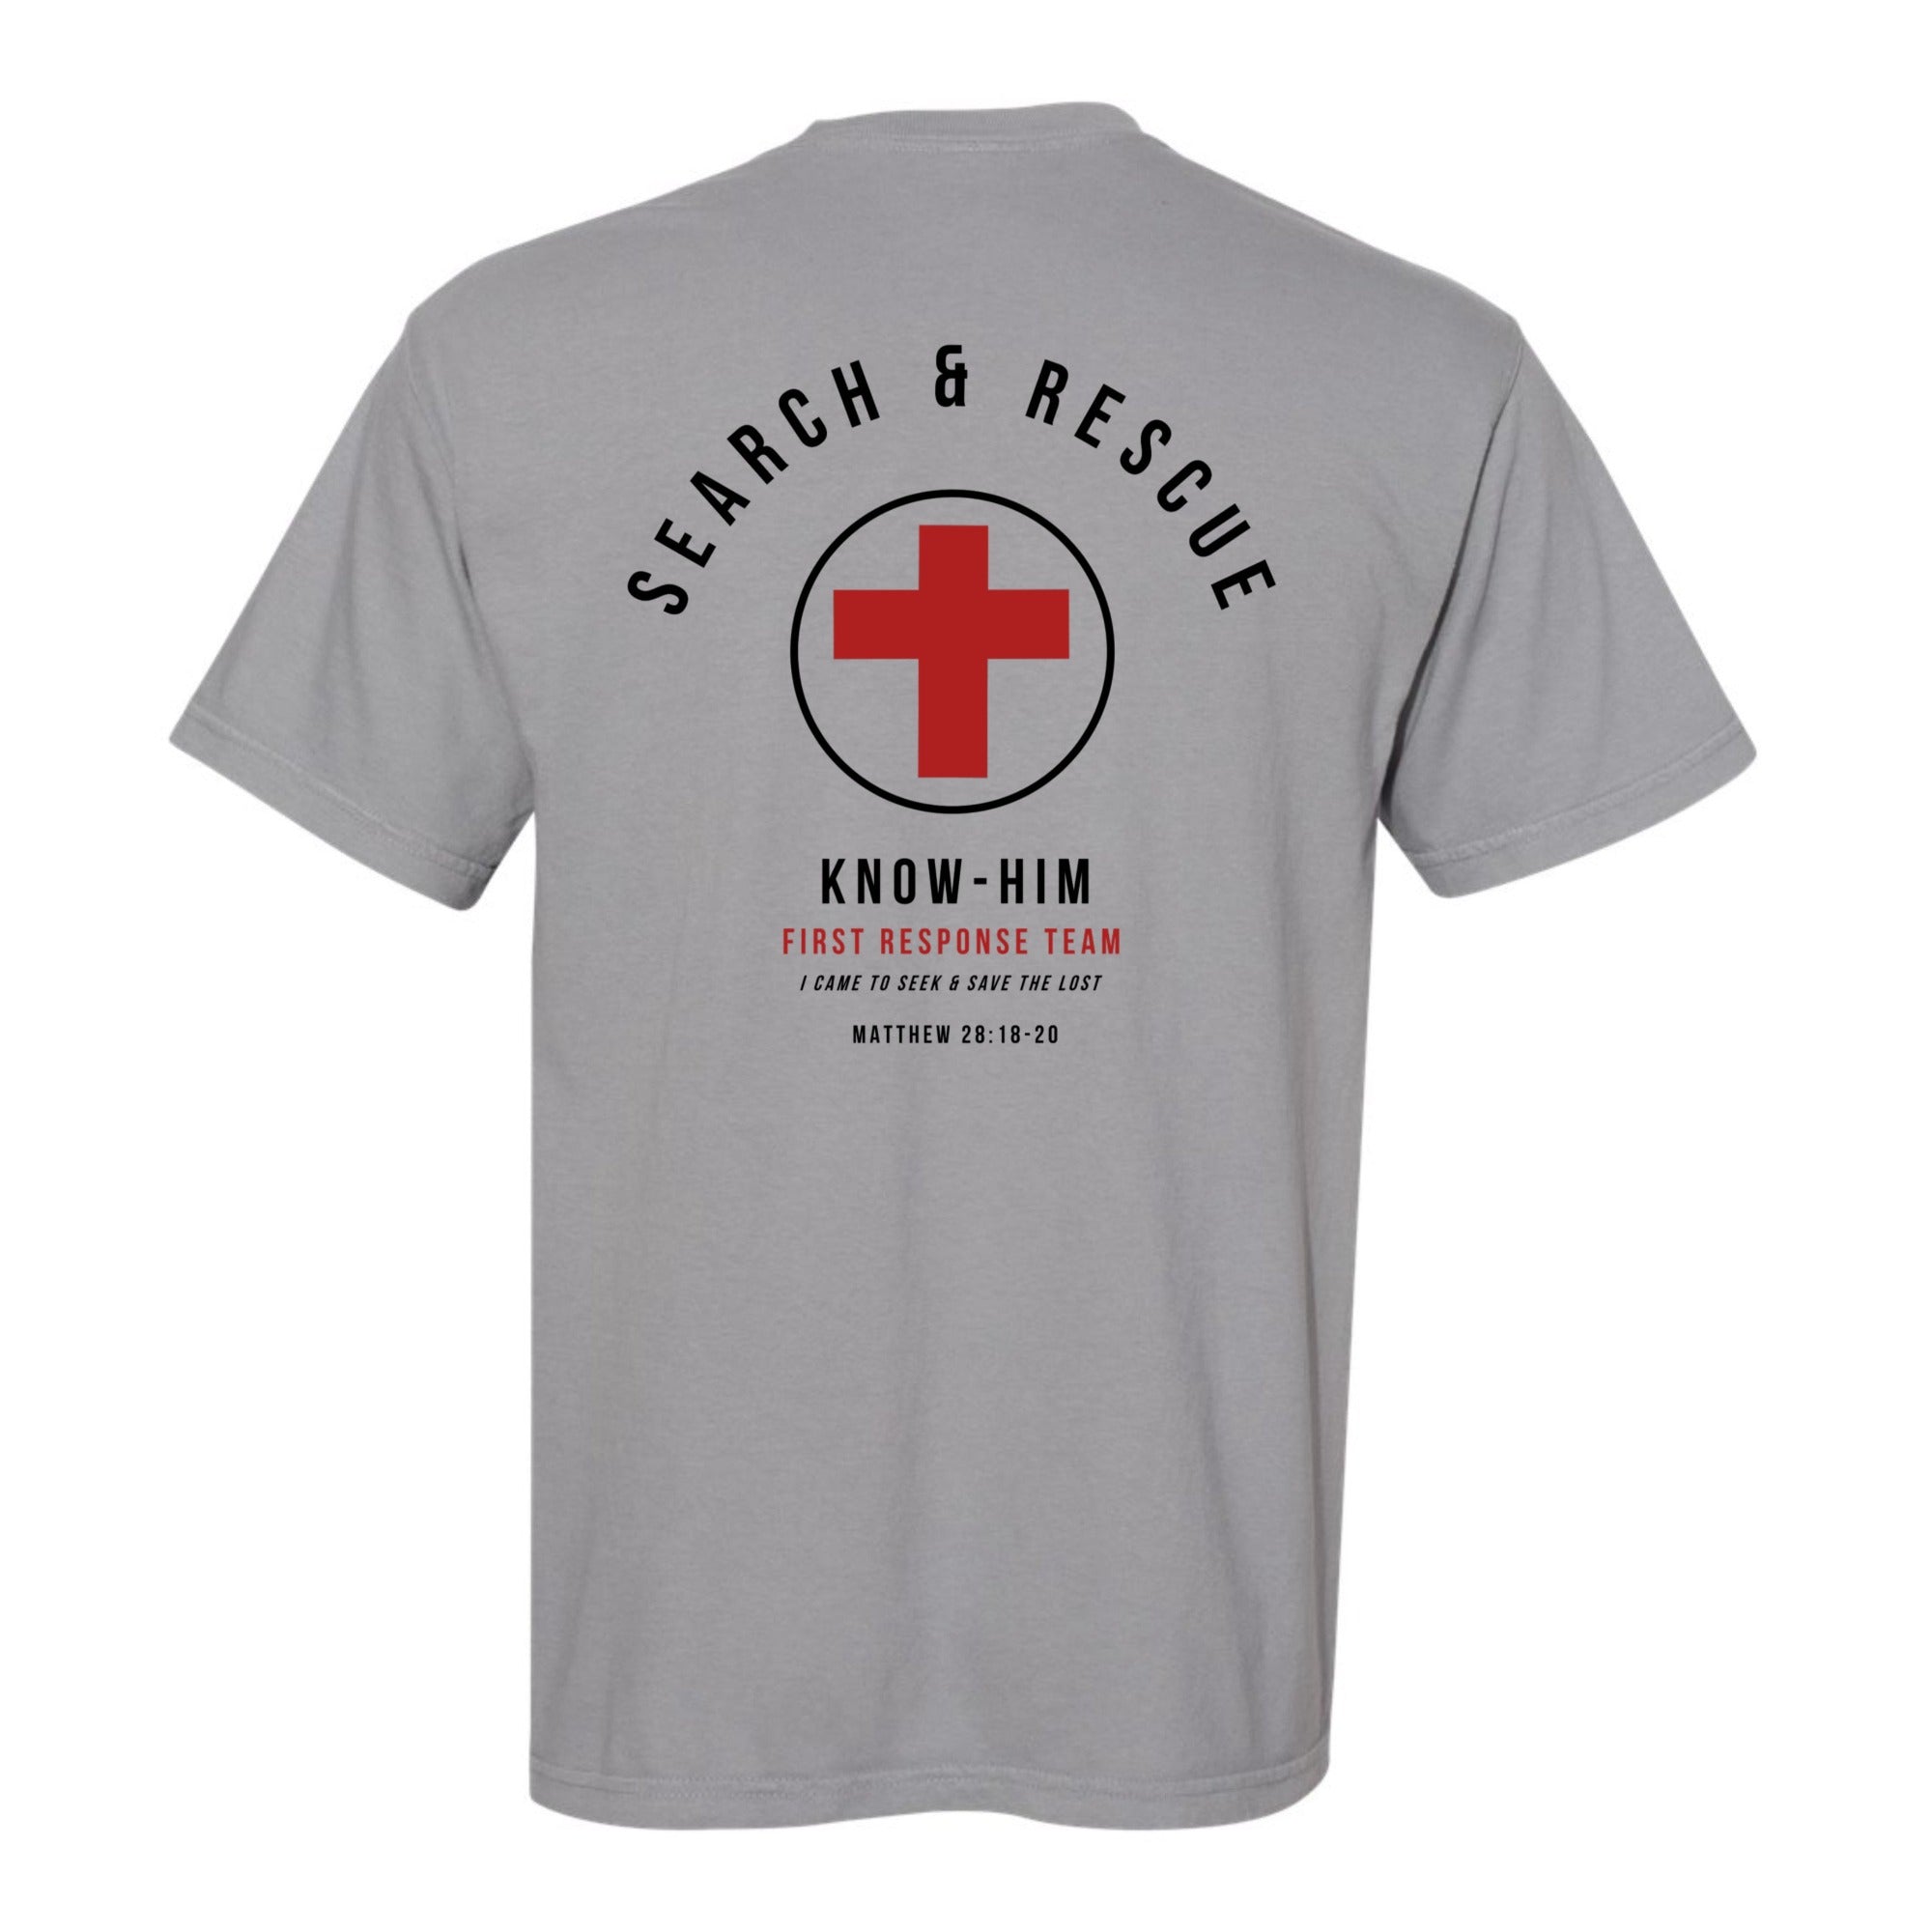 Search and Rescue (Iron) - Shirt